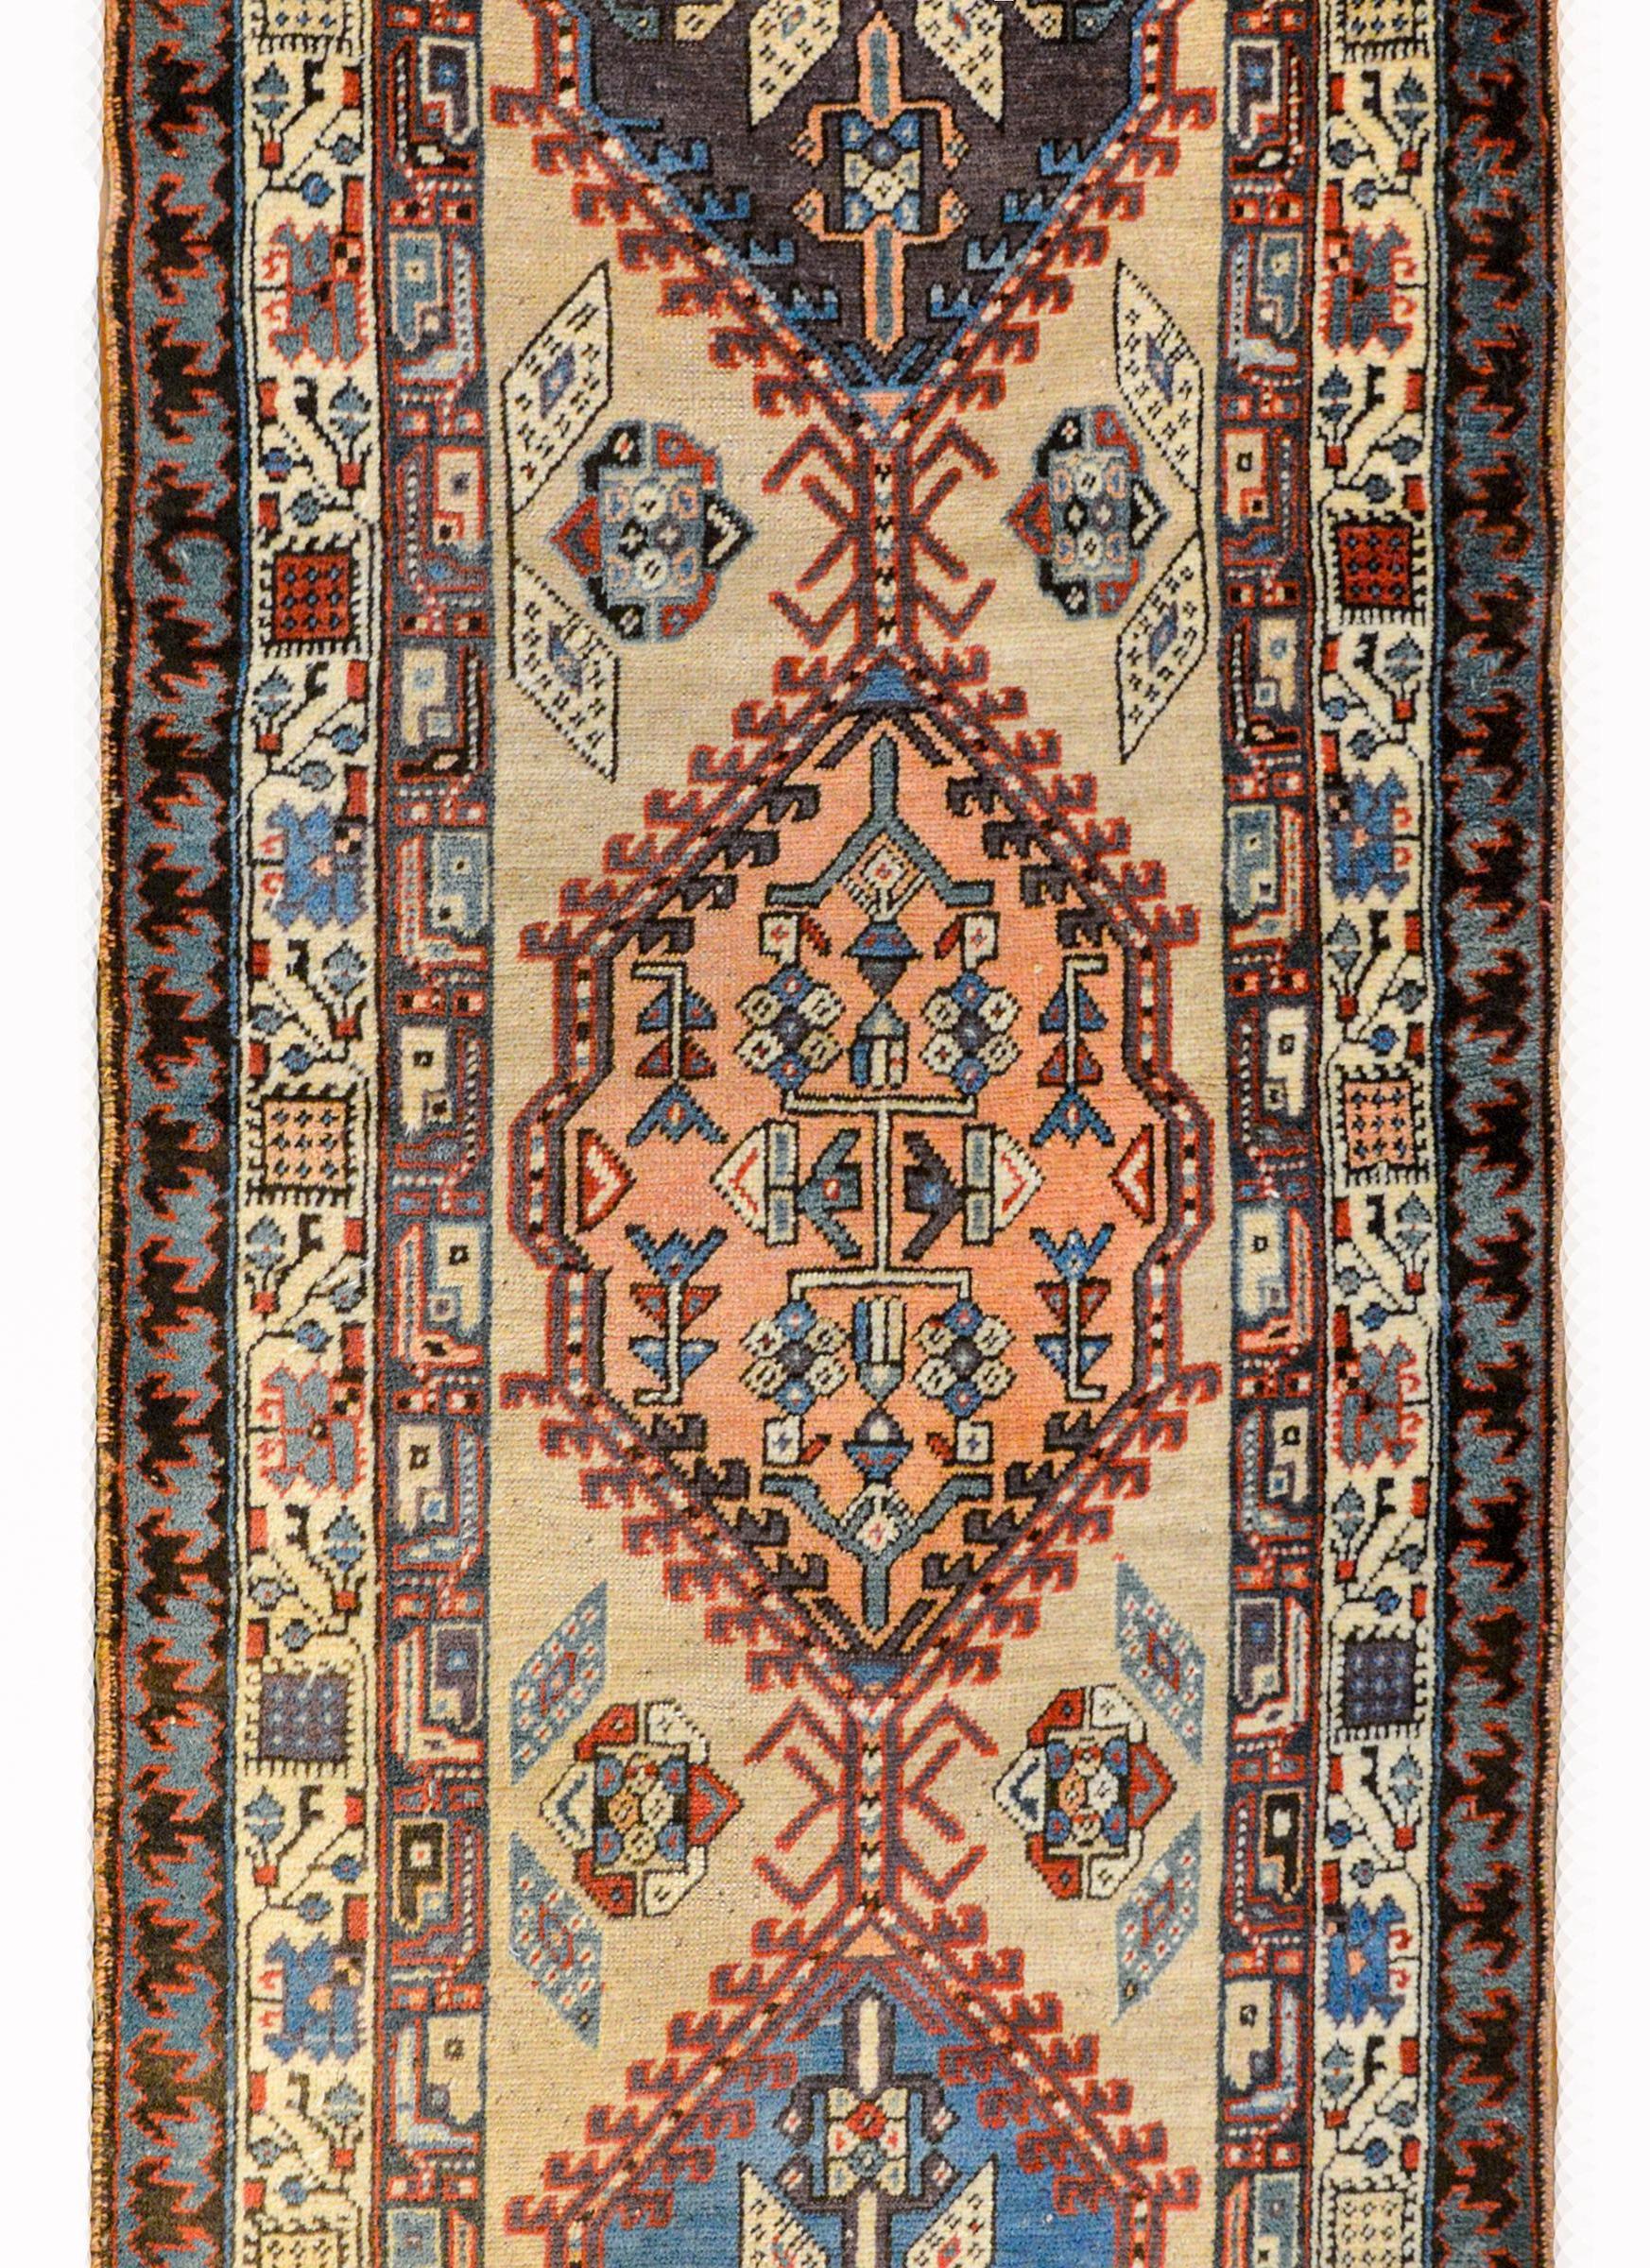 A fantastic early 20th century Persian Serab runner with six large diamond patterned medallions, each with a unique stylized floral pattern, woven in crimson, indigo, pink, and brown, and all set against a camel colored background. The border is